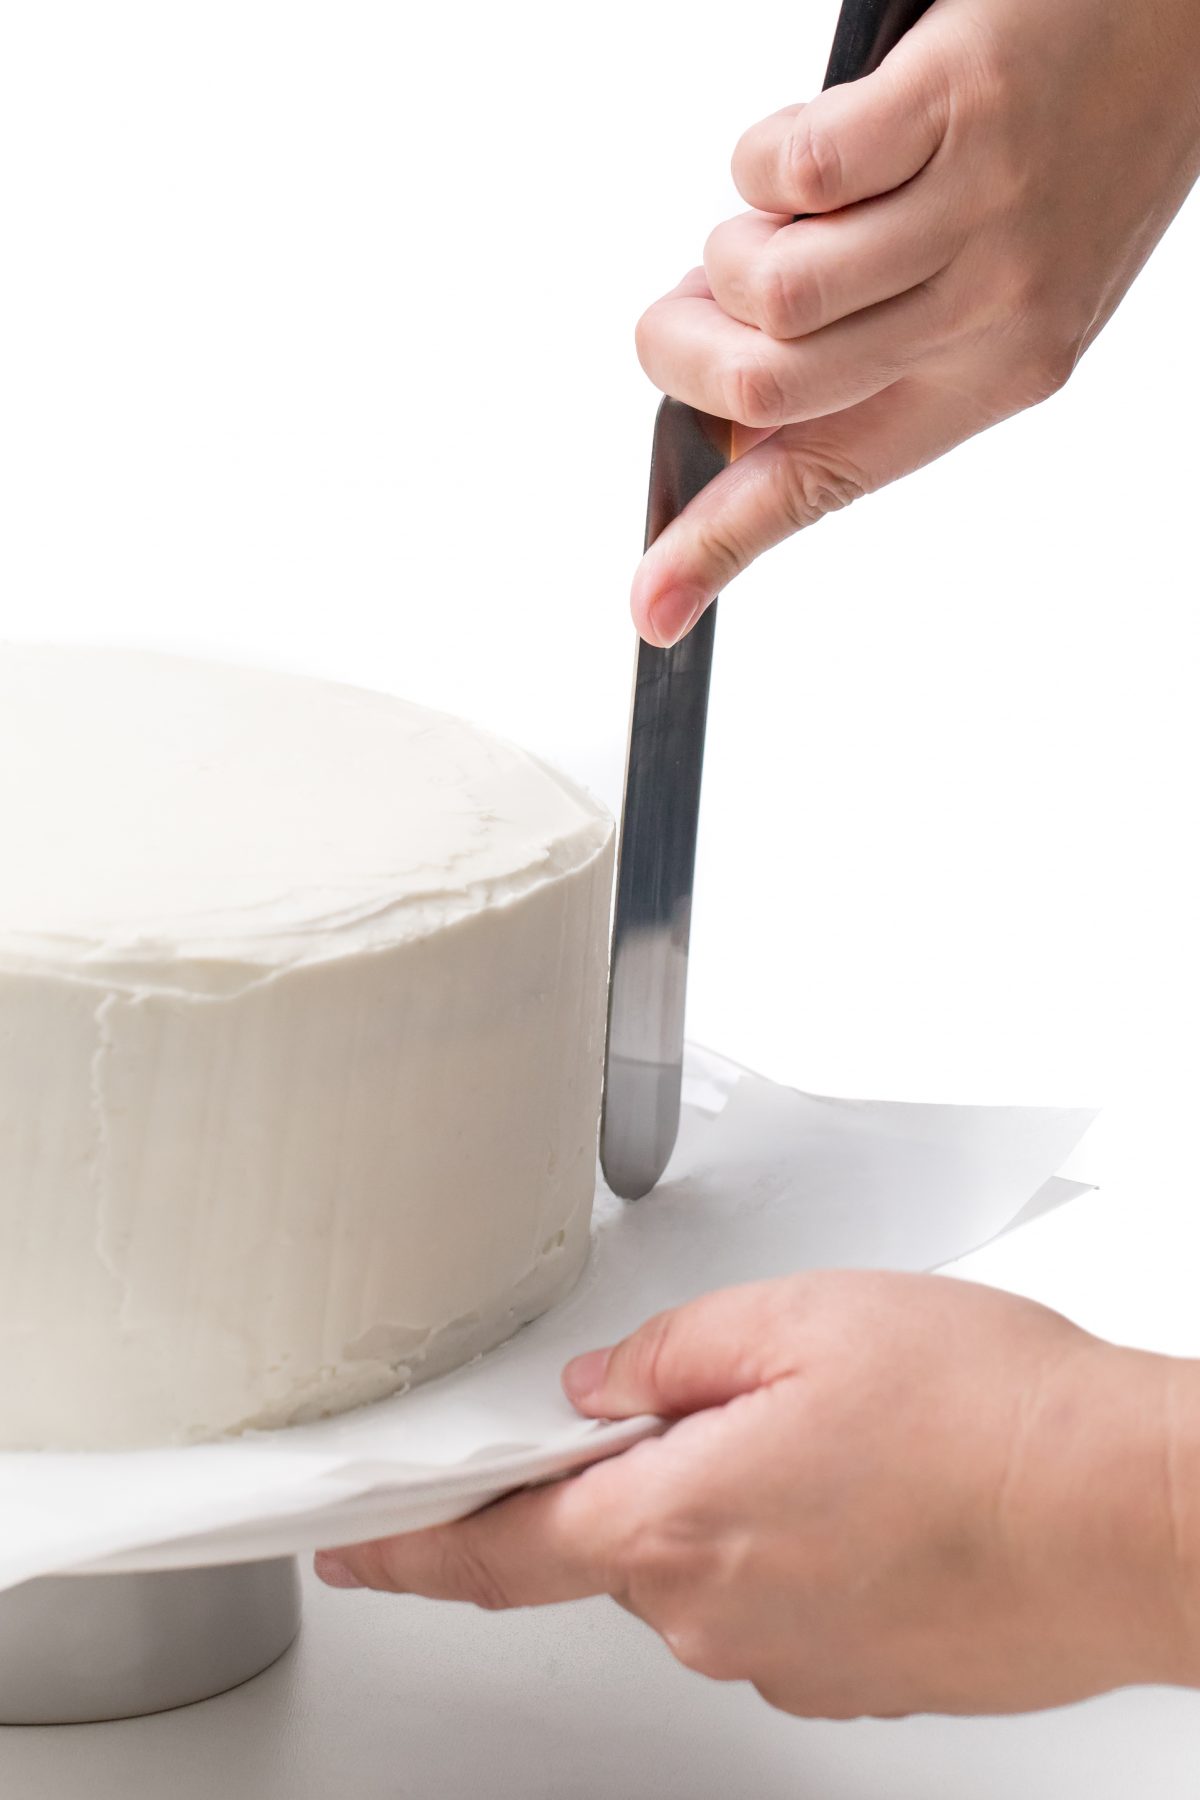 Smooth out buttercream on all surfaces of cake